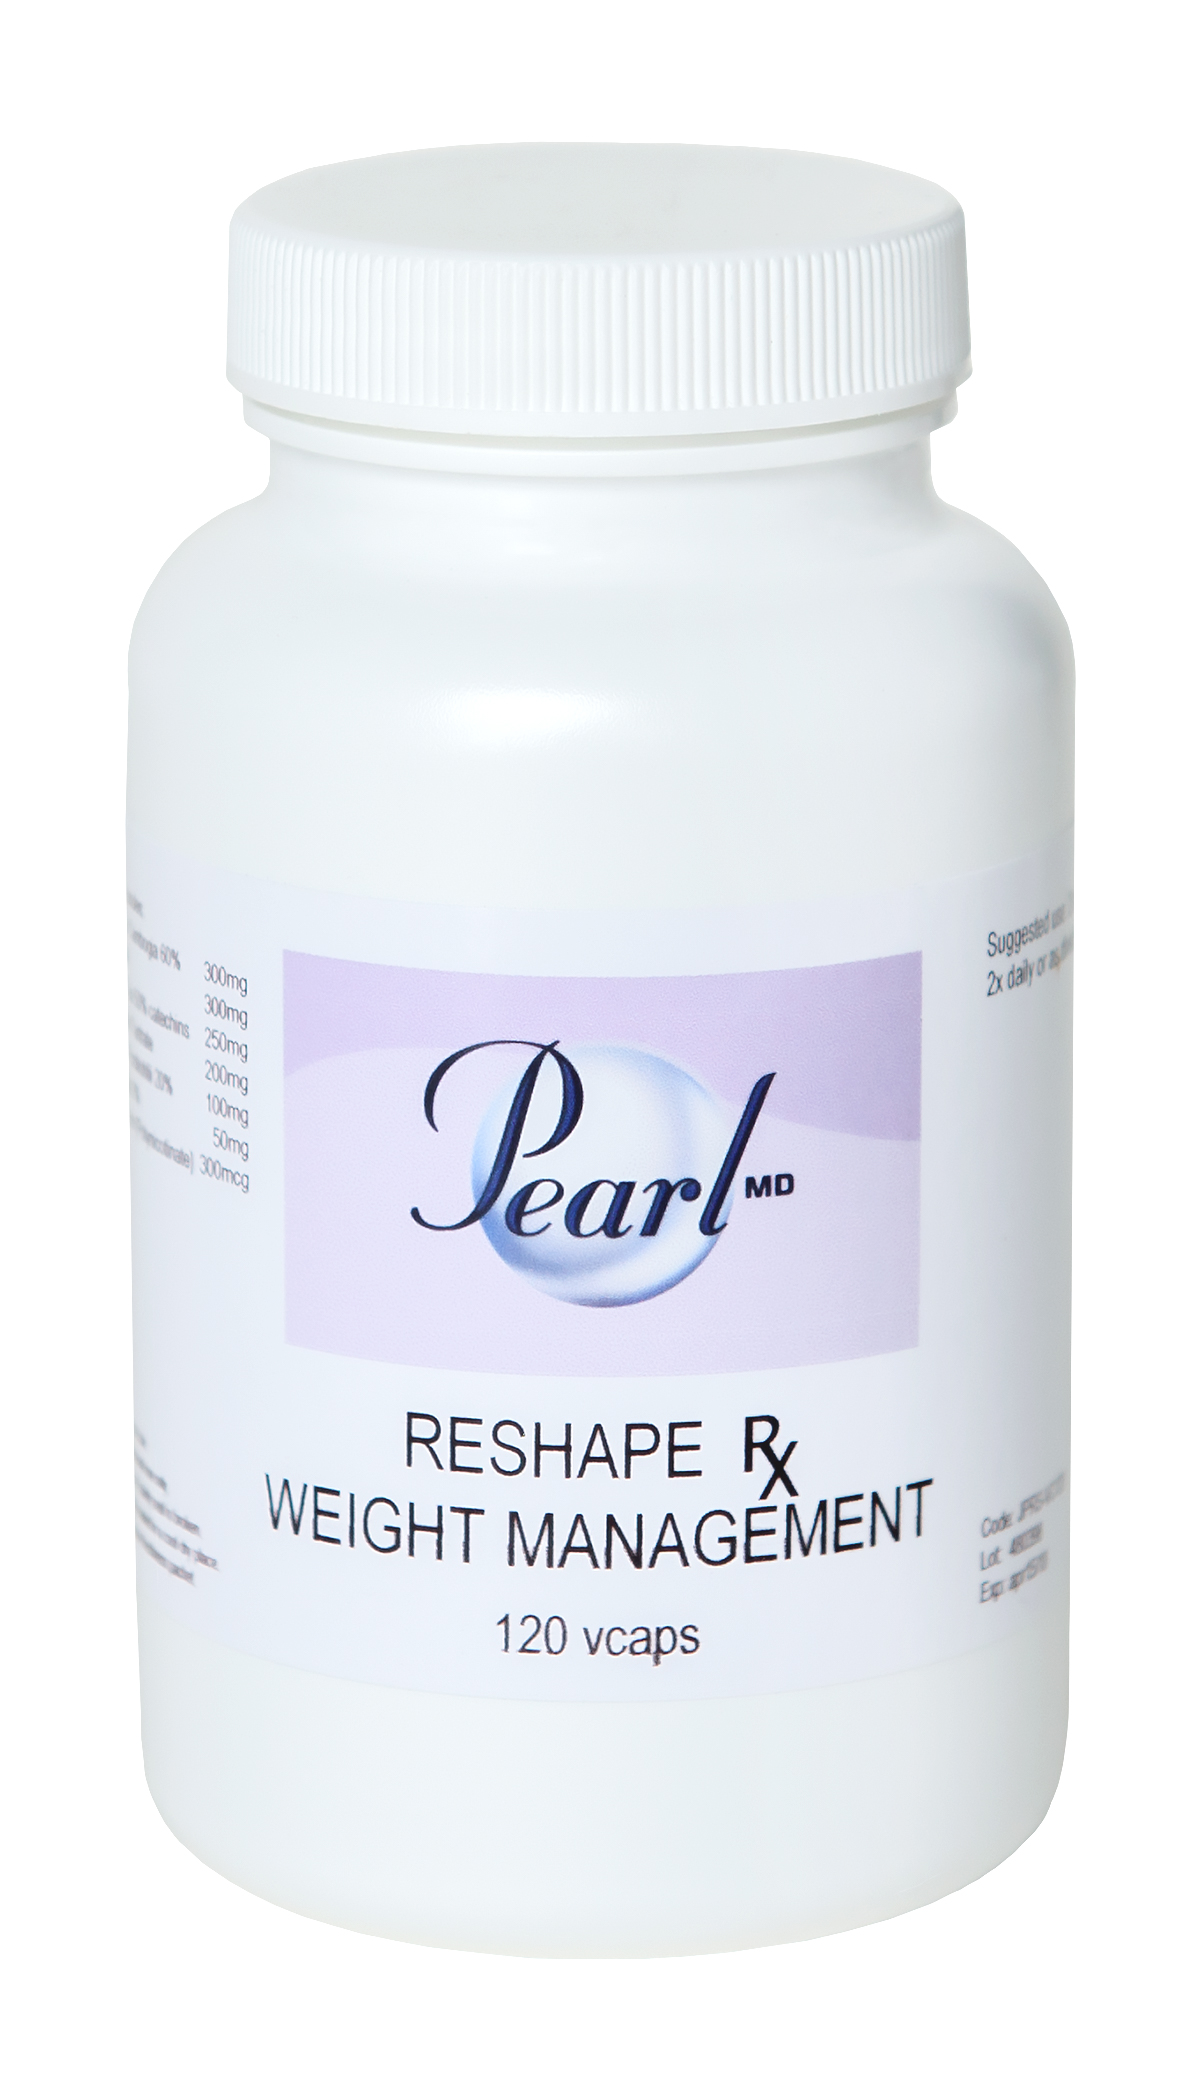 Reshape RX and Weight Management